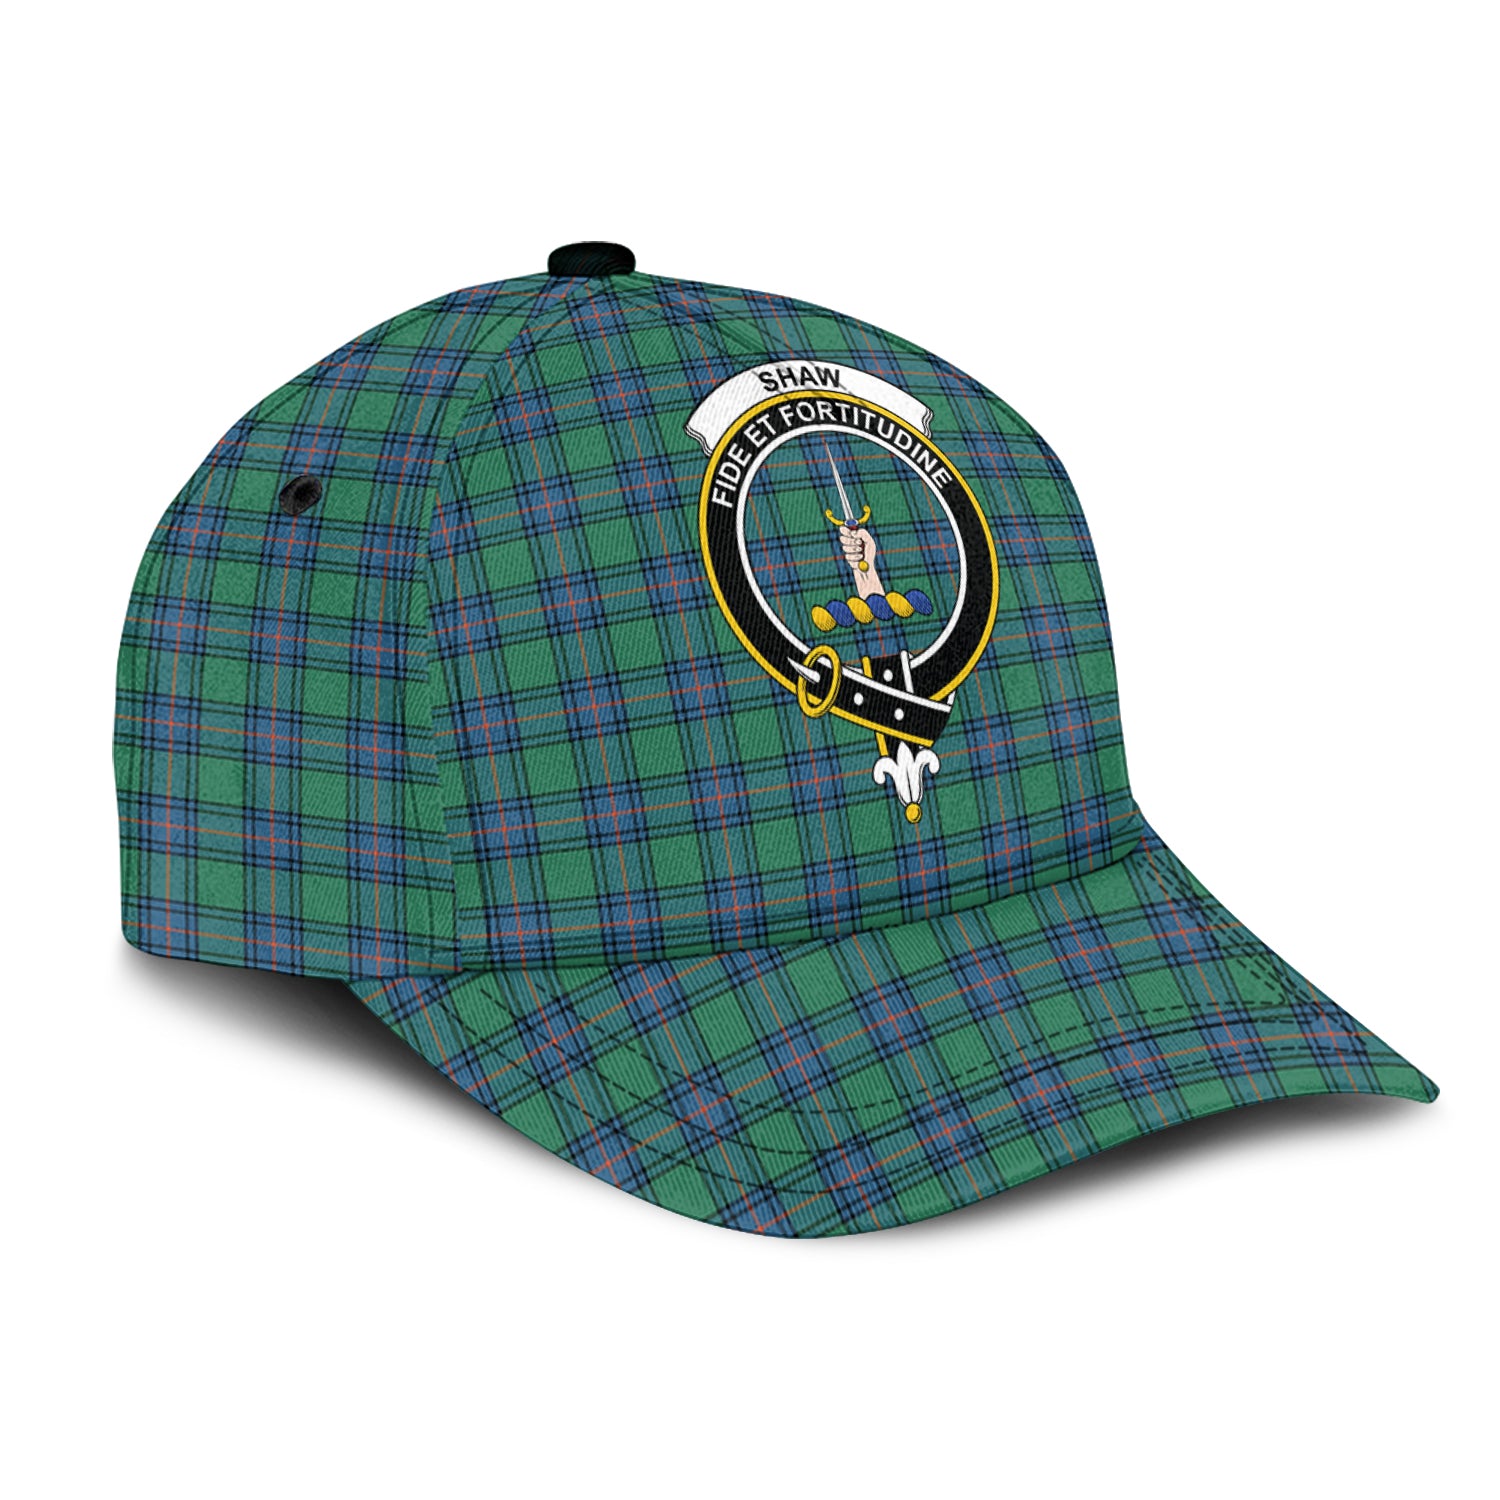 shaw-ancient-tartan-classic-cap-with-family-crest